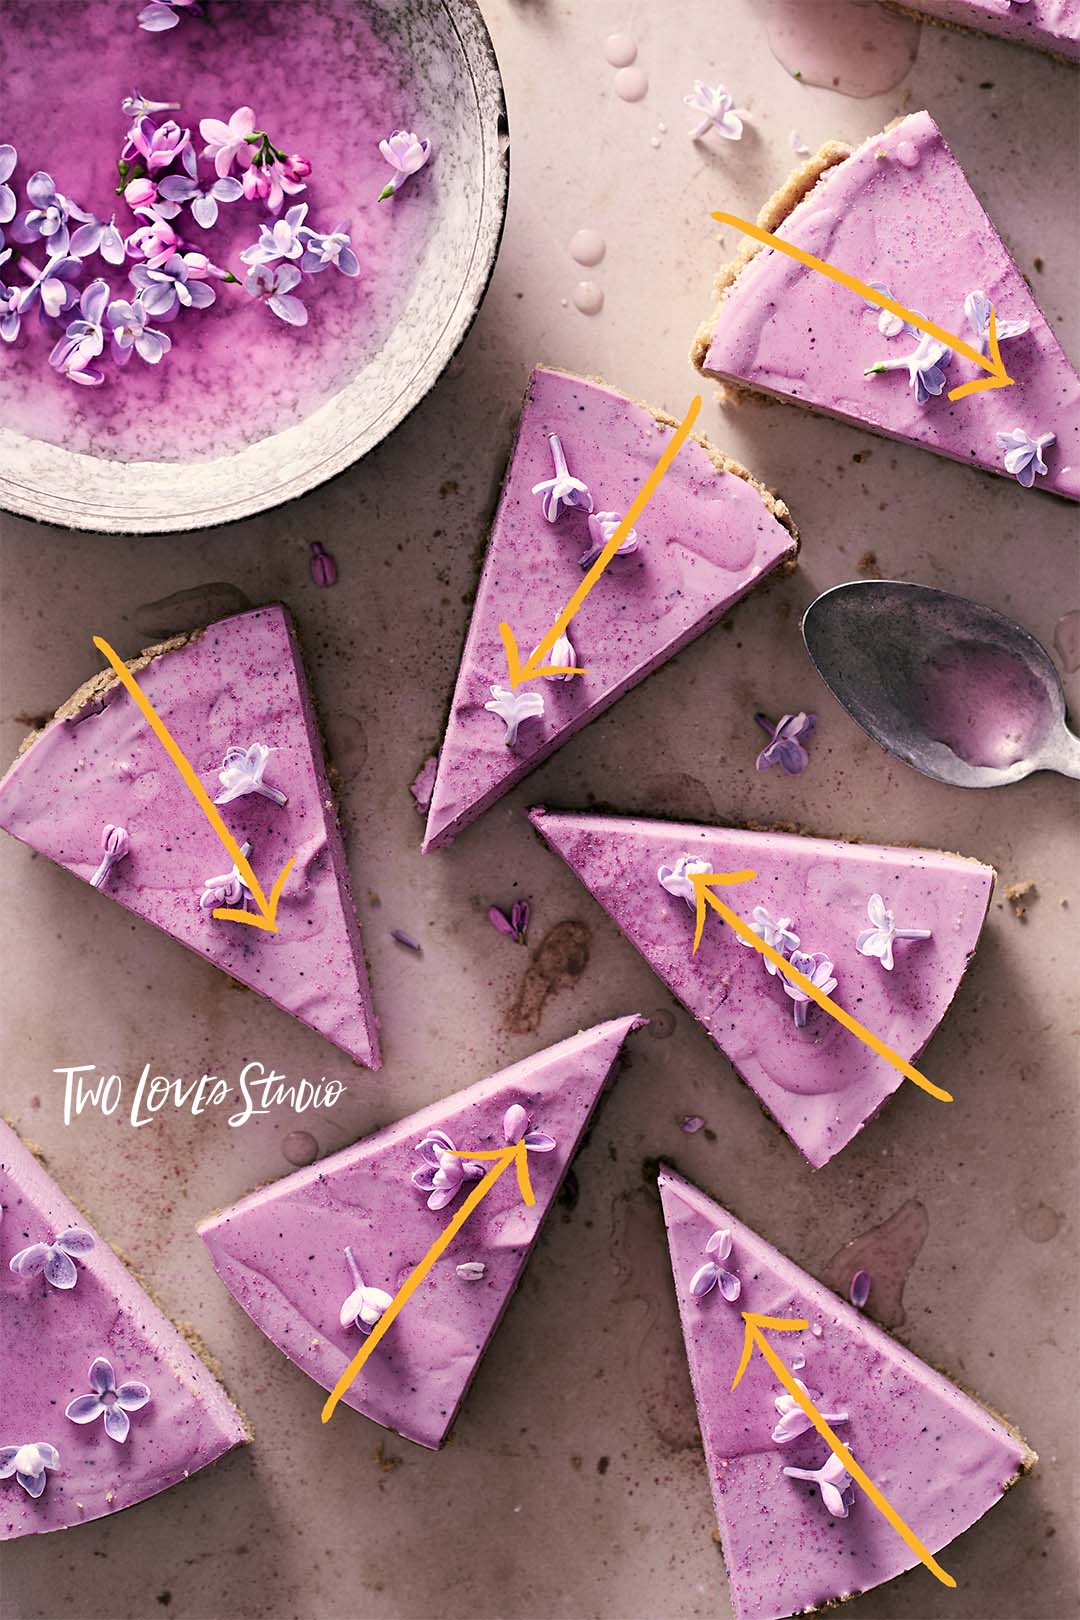 Blueberry lilac tart slices with arrows demonstrating a composition secret in food photography